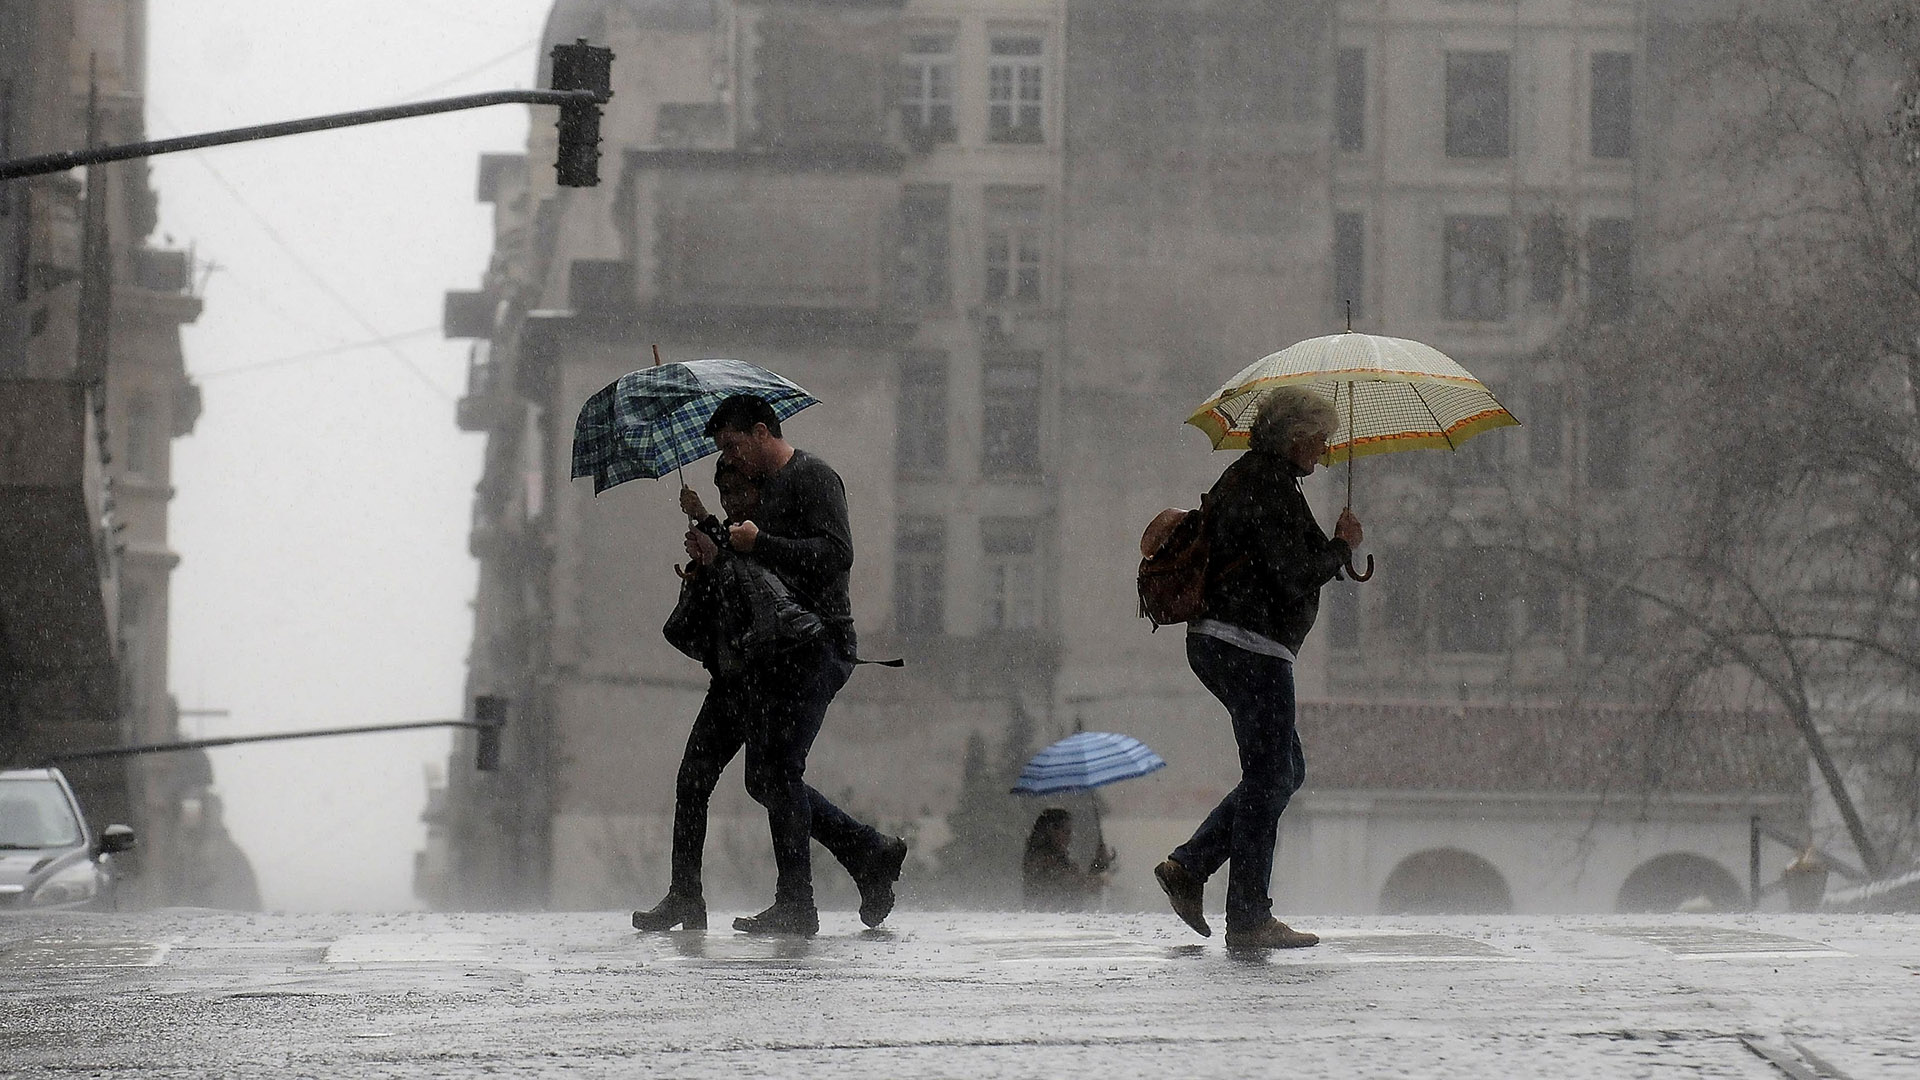 In some districts, up to 90 millimeters of accumulated precipitation is expected